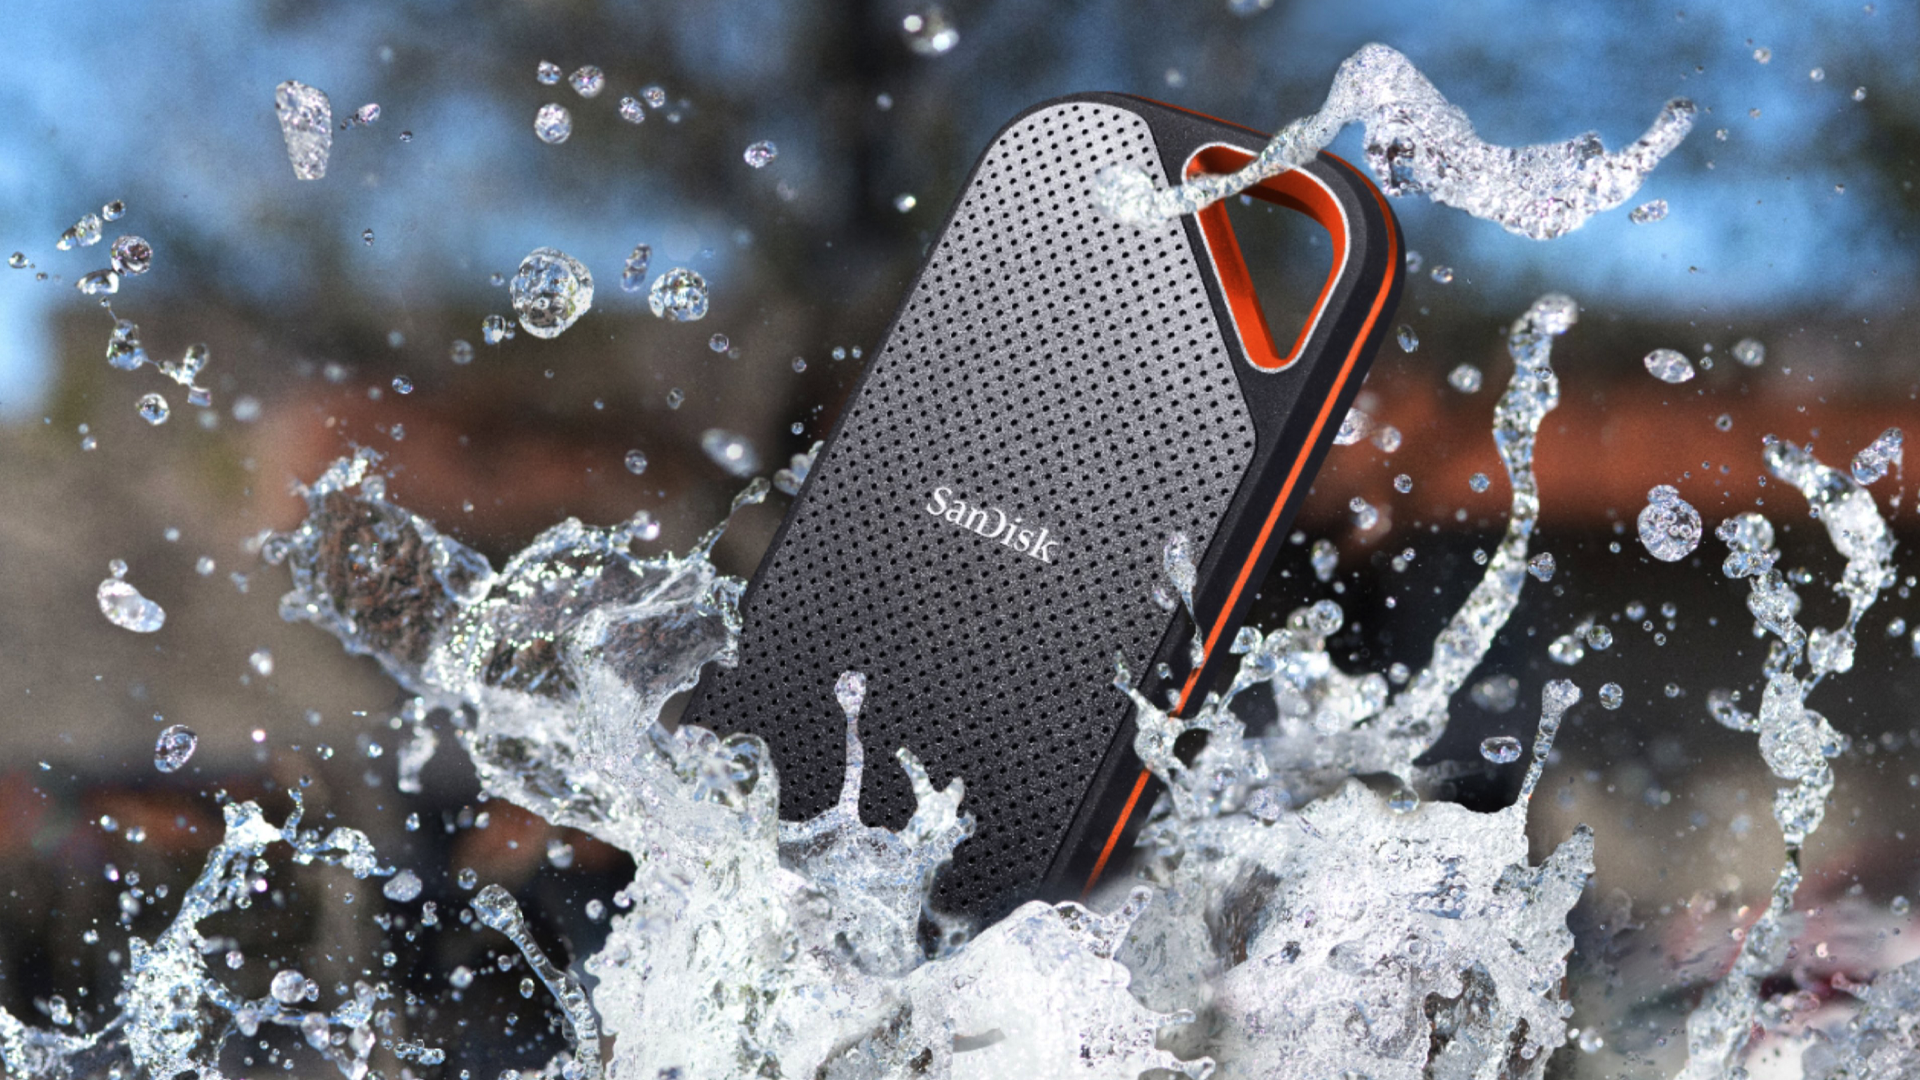 The SanDisk Extreme PRO Portable SSD dunked in a puddle of water